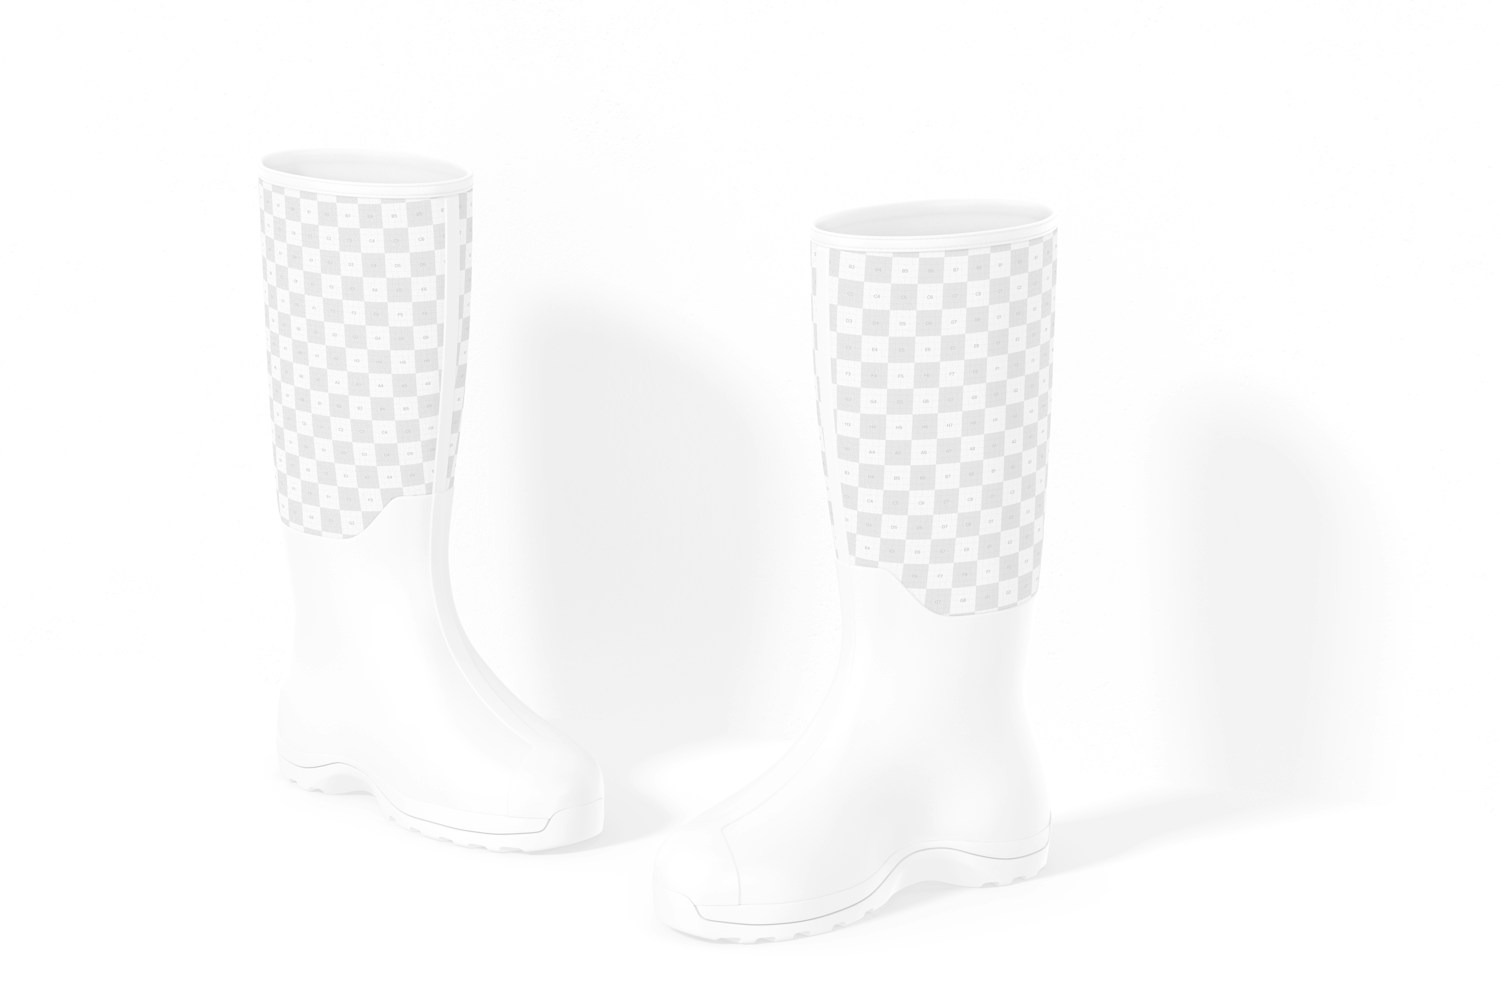 Rubber Boots Mockup 02